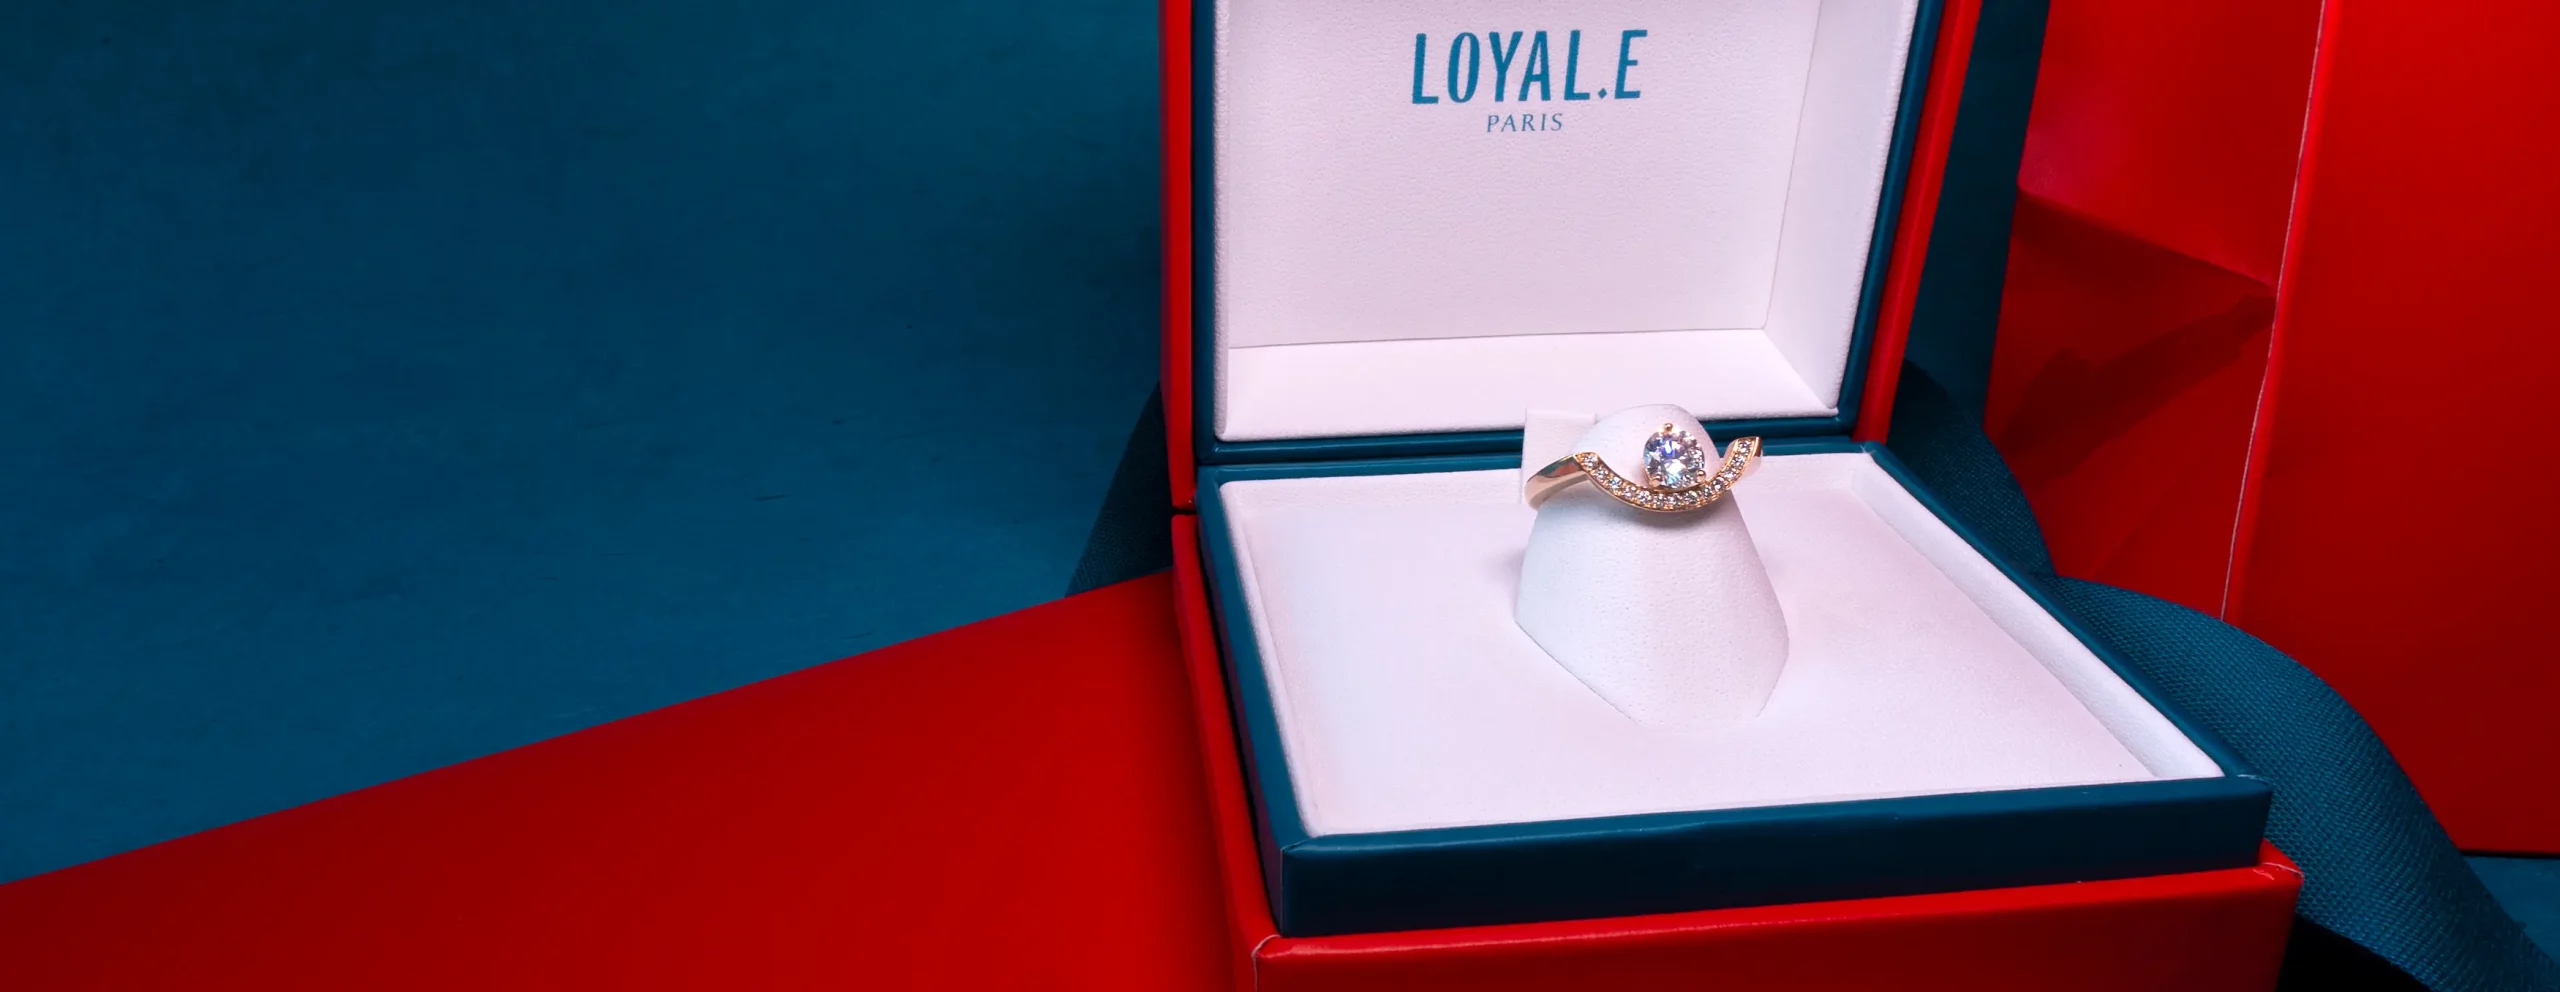 ethical engagement ring in sustainable jewelry box Loyale Paris contact